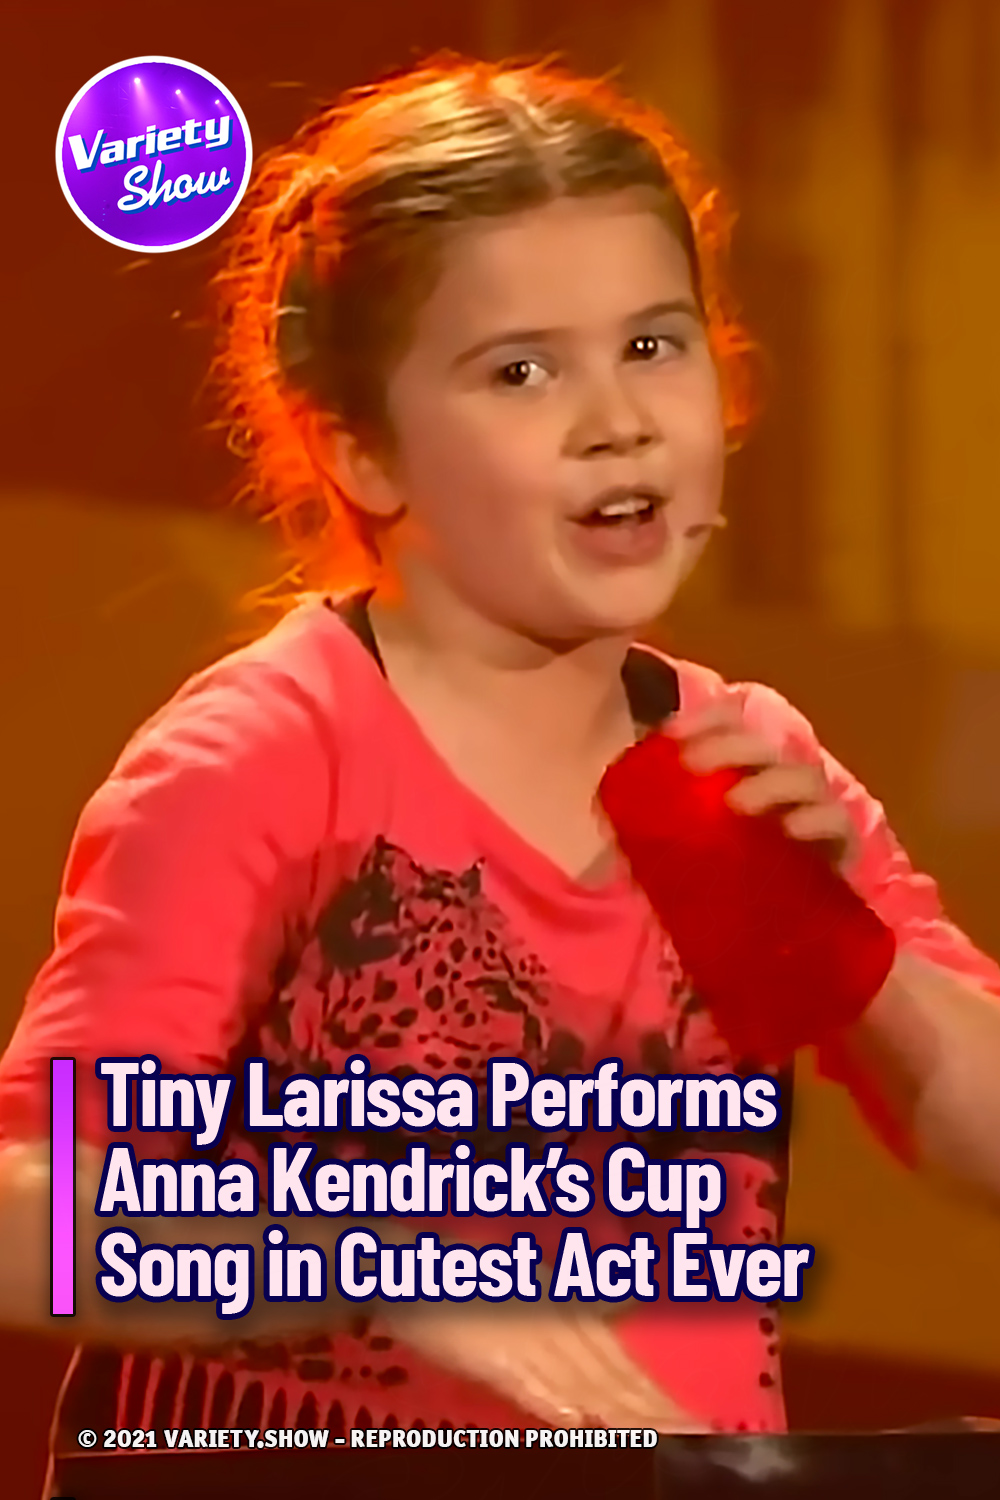 Tiny Larissa Performs Anna Kendrick’s Cup Song in Cutest Act Ever